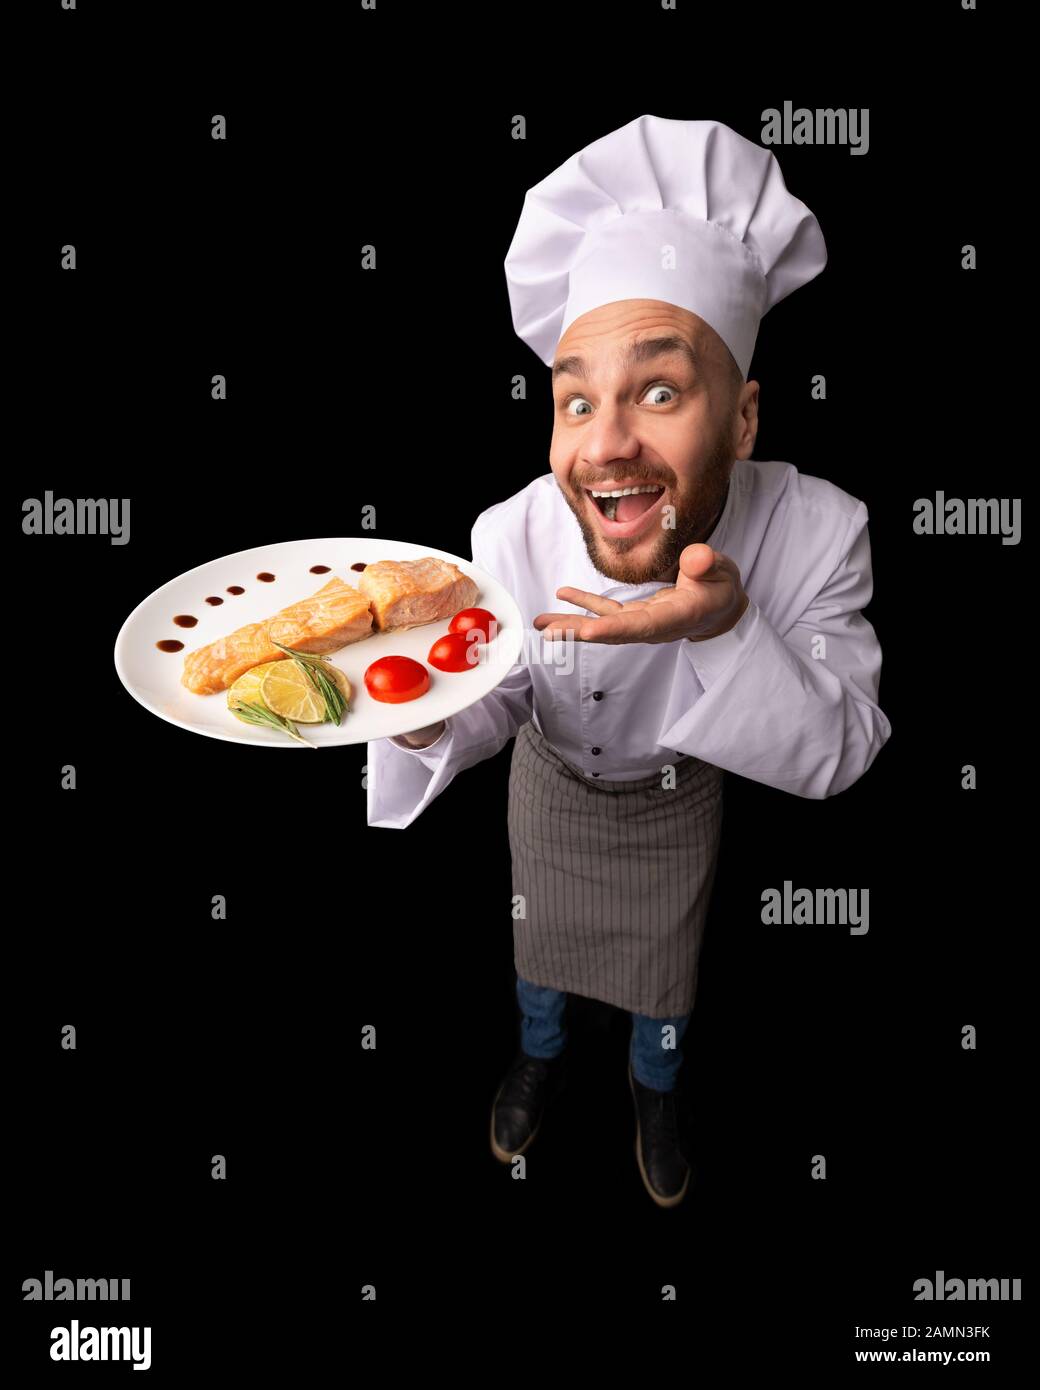 Funny Chef Guy Holding Fish Dish Standing In Studio, High-Angle Stock Photo